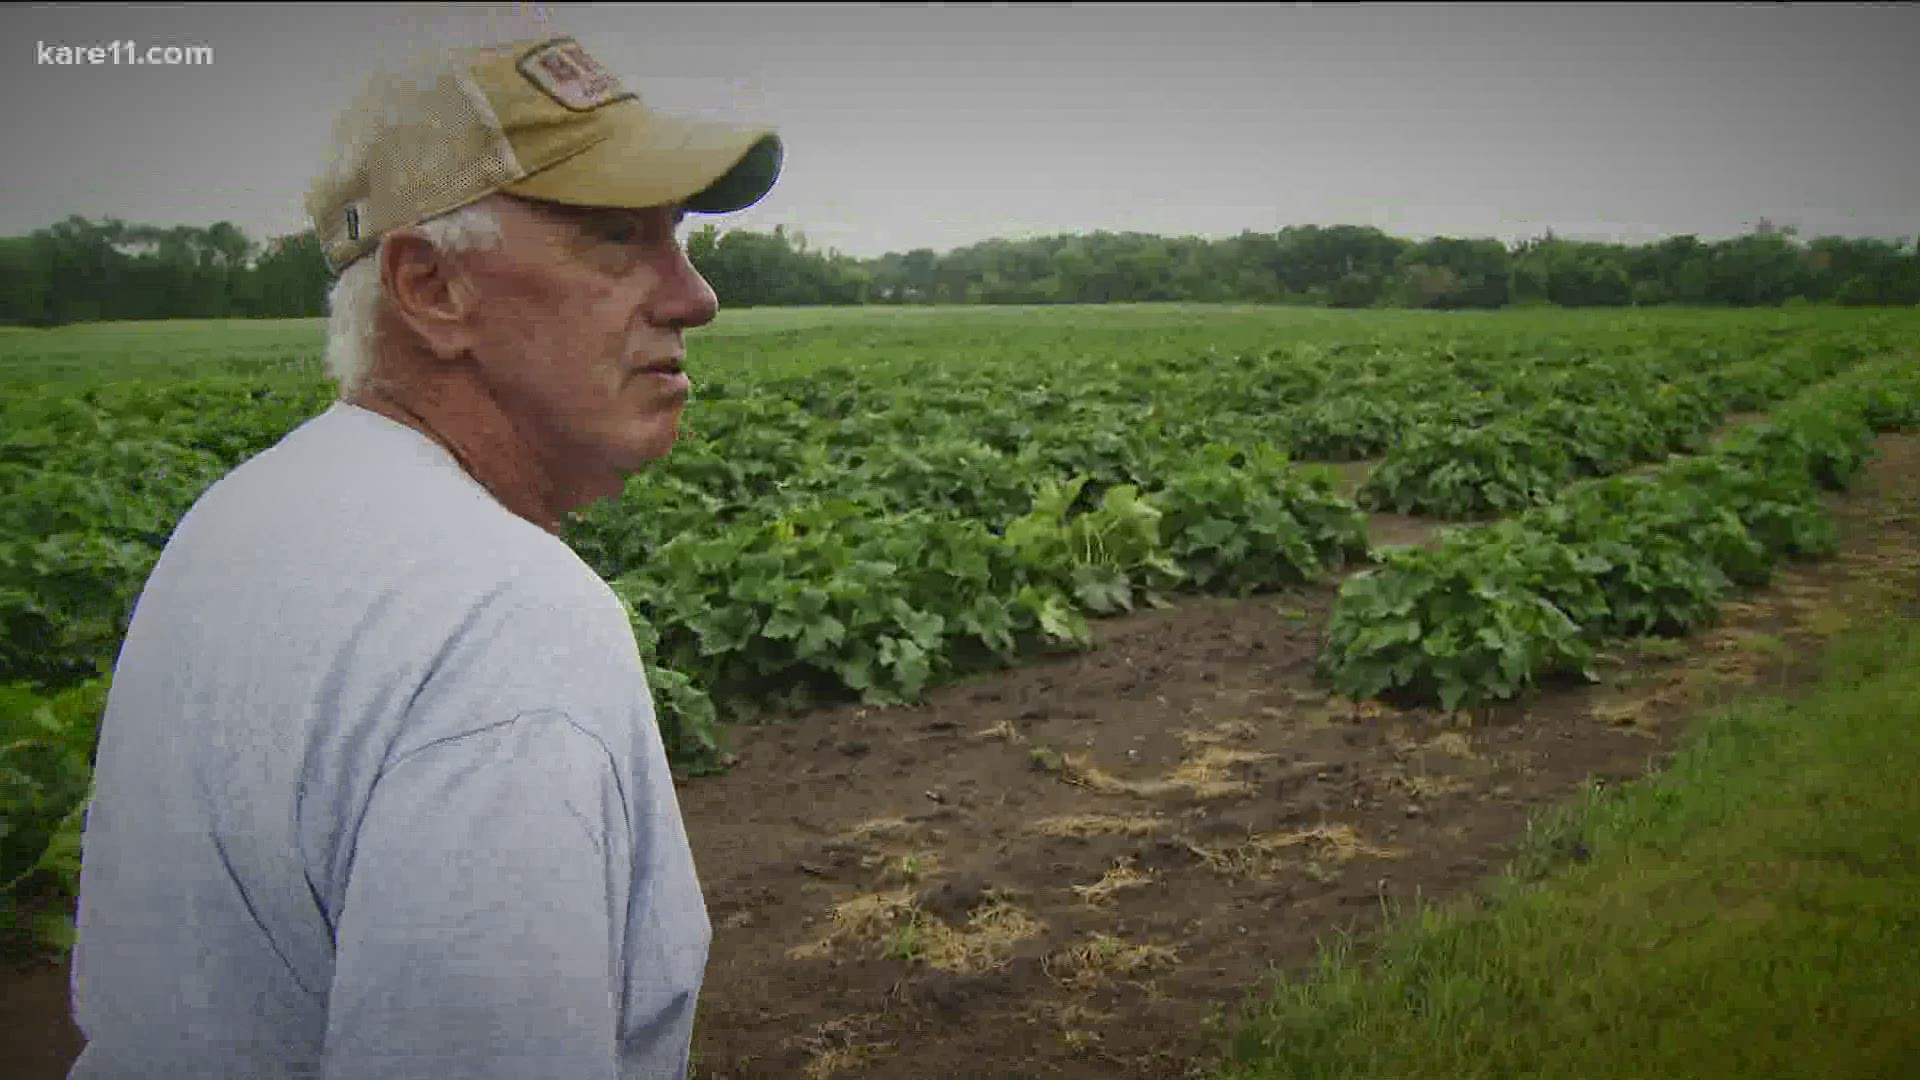 Wednesday's rainfall was welcome news for farmers, who've been dealing with a long drought.